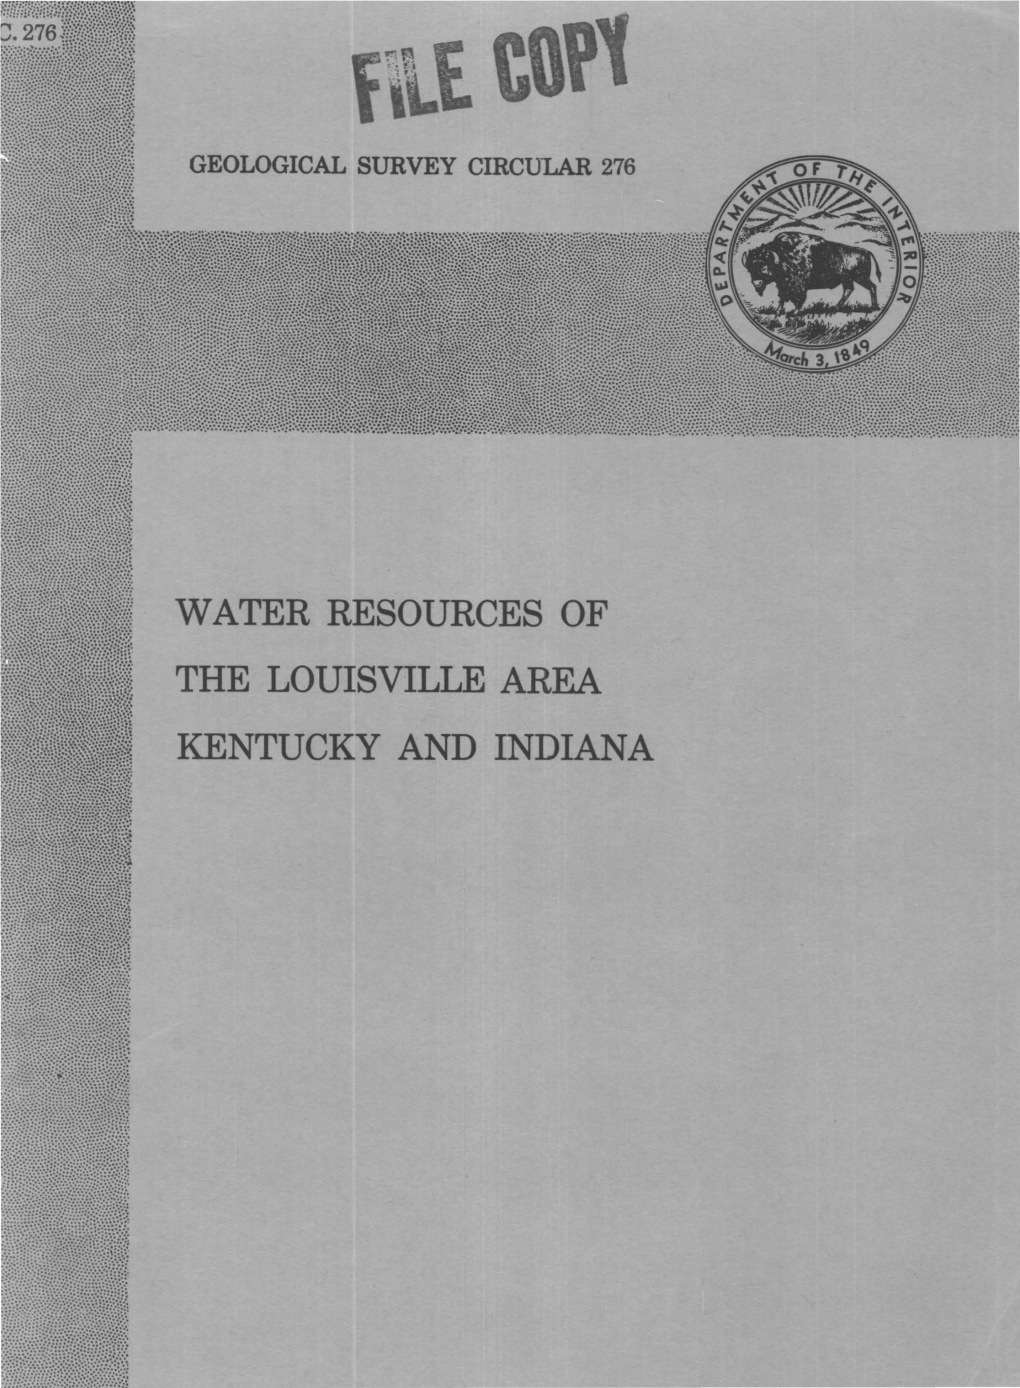 Water Resources of the Louisville Area Kentucky and Indiana